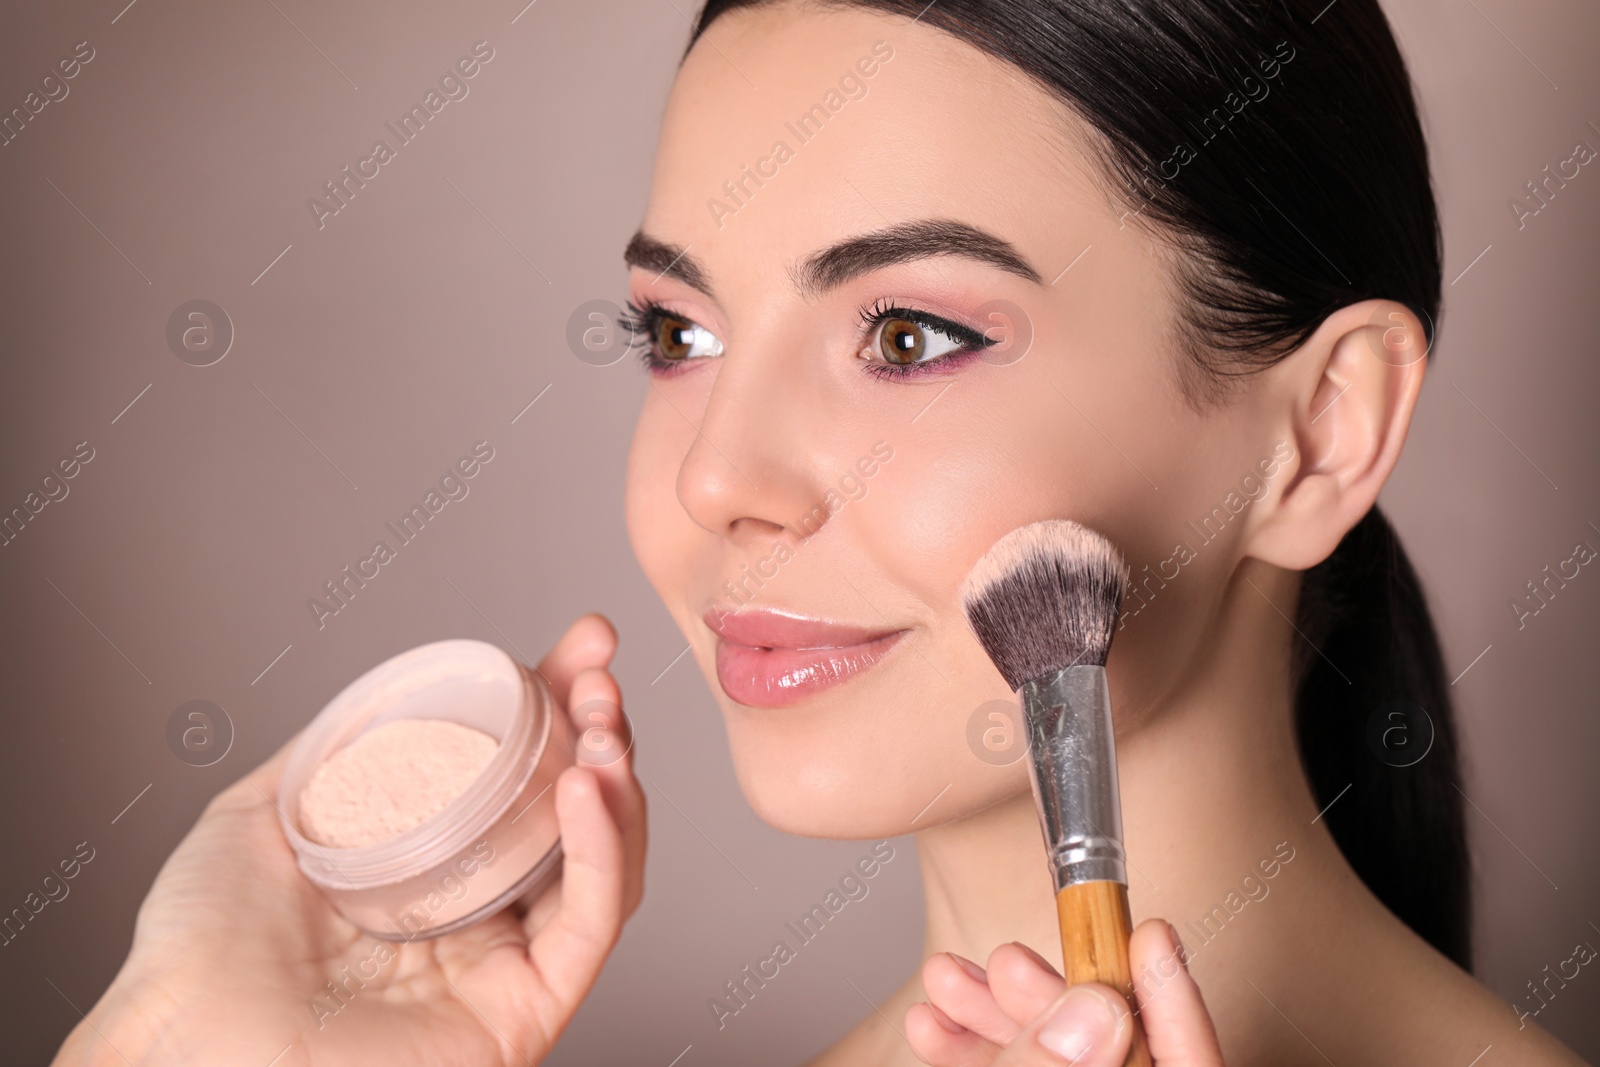 Photo of Professional makeup artist applying powder onto beautiful young woman's face with brush on dusty rose background, closeup